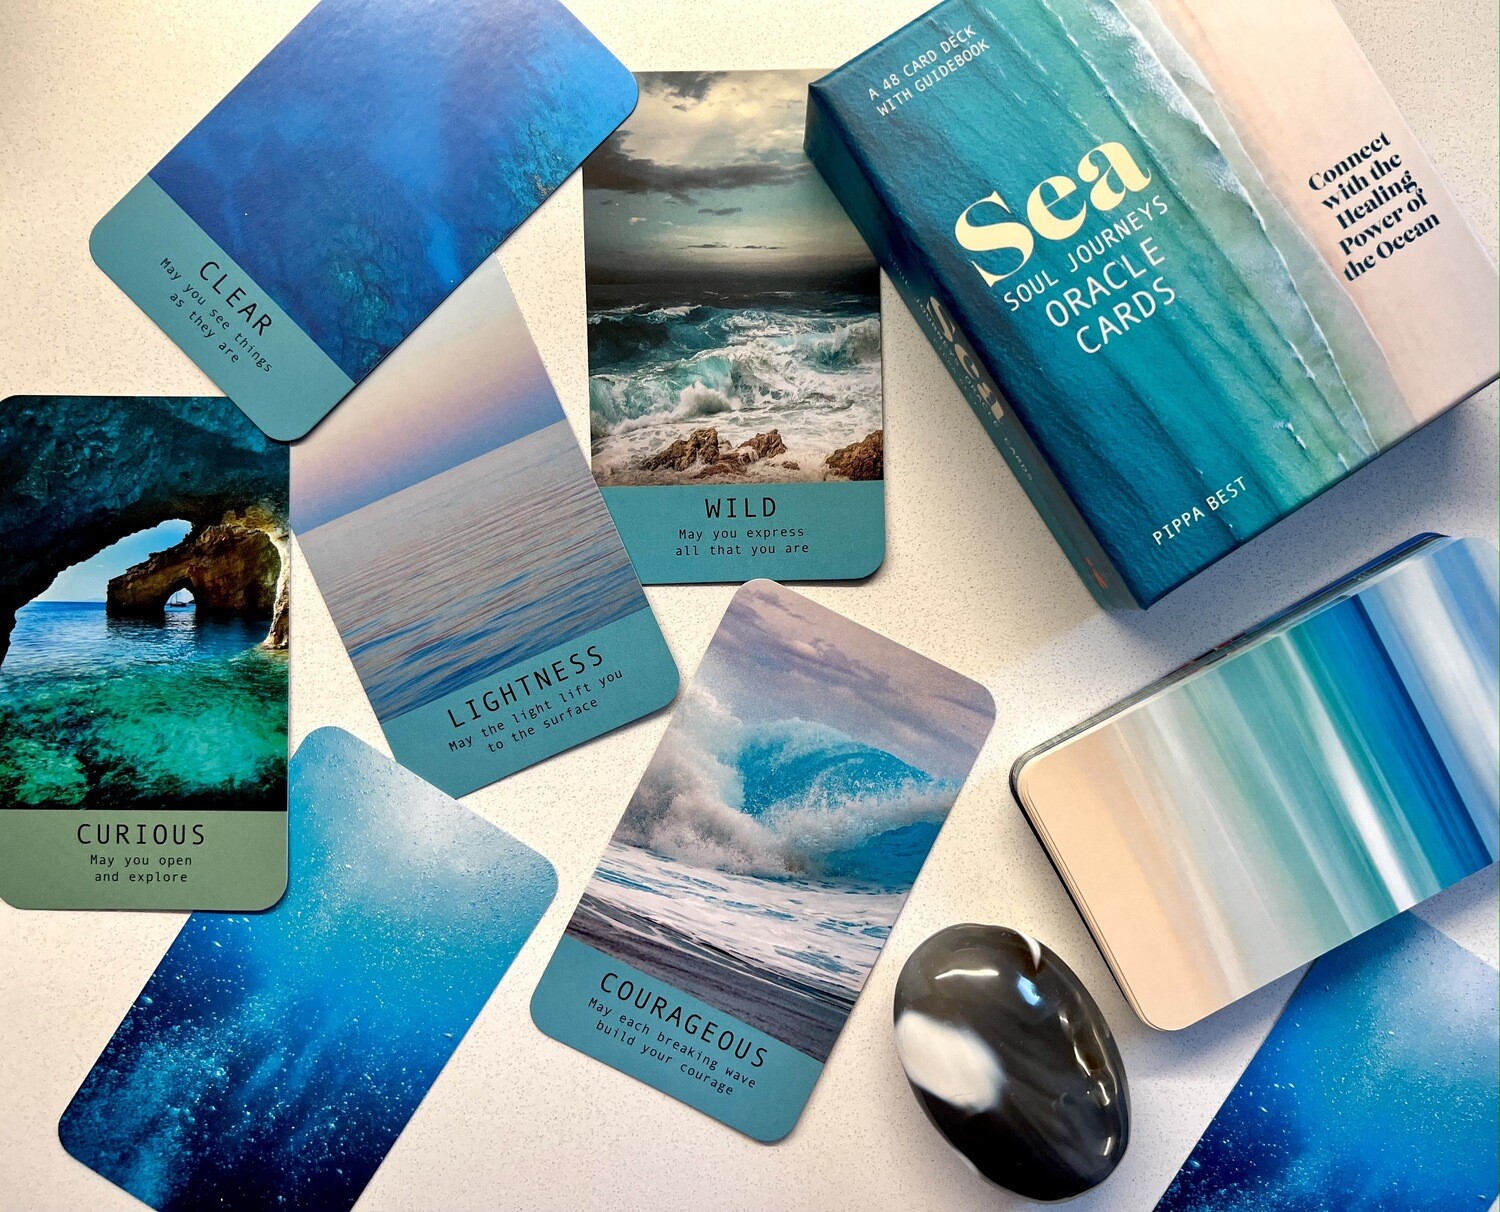 Sea Soul Journey Oracle Cards